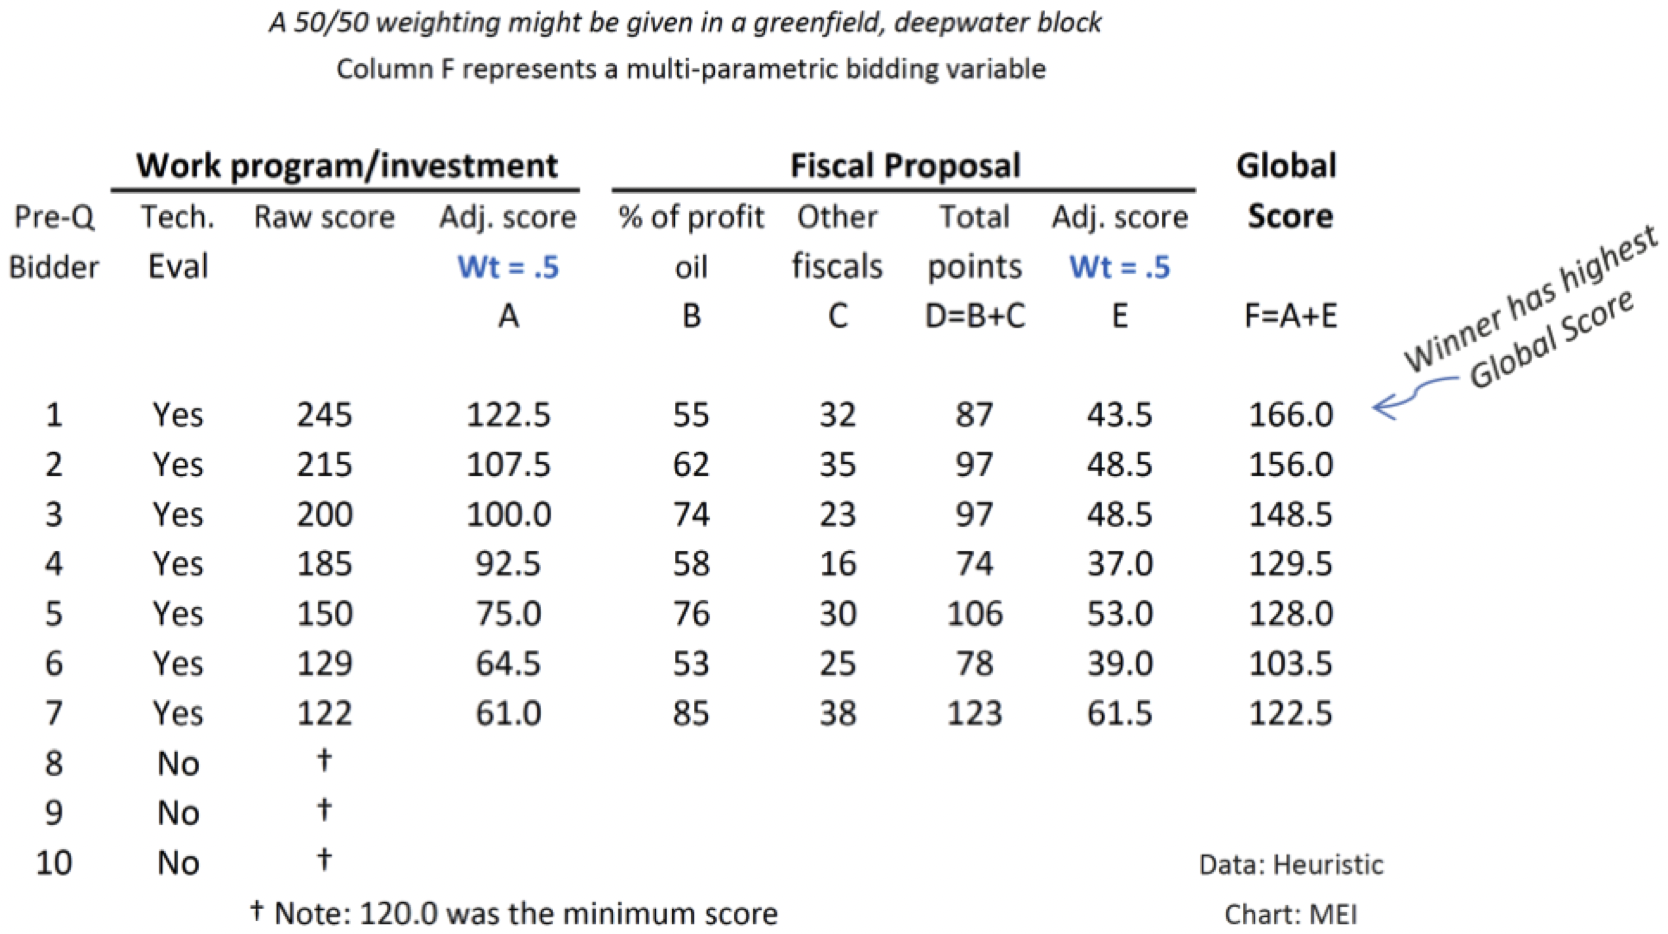 This table shows that the global score reflects the importance given to the work program.